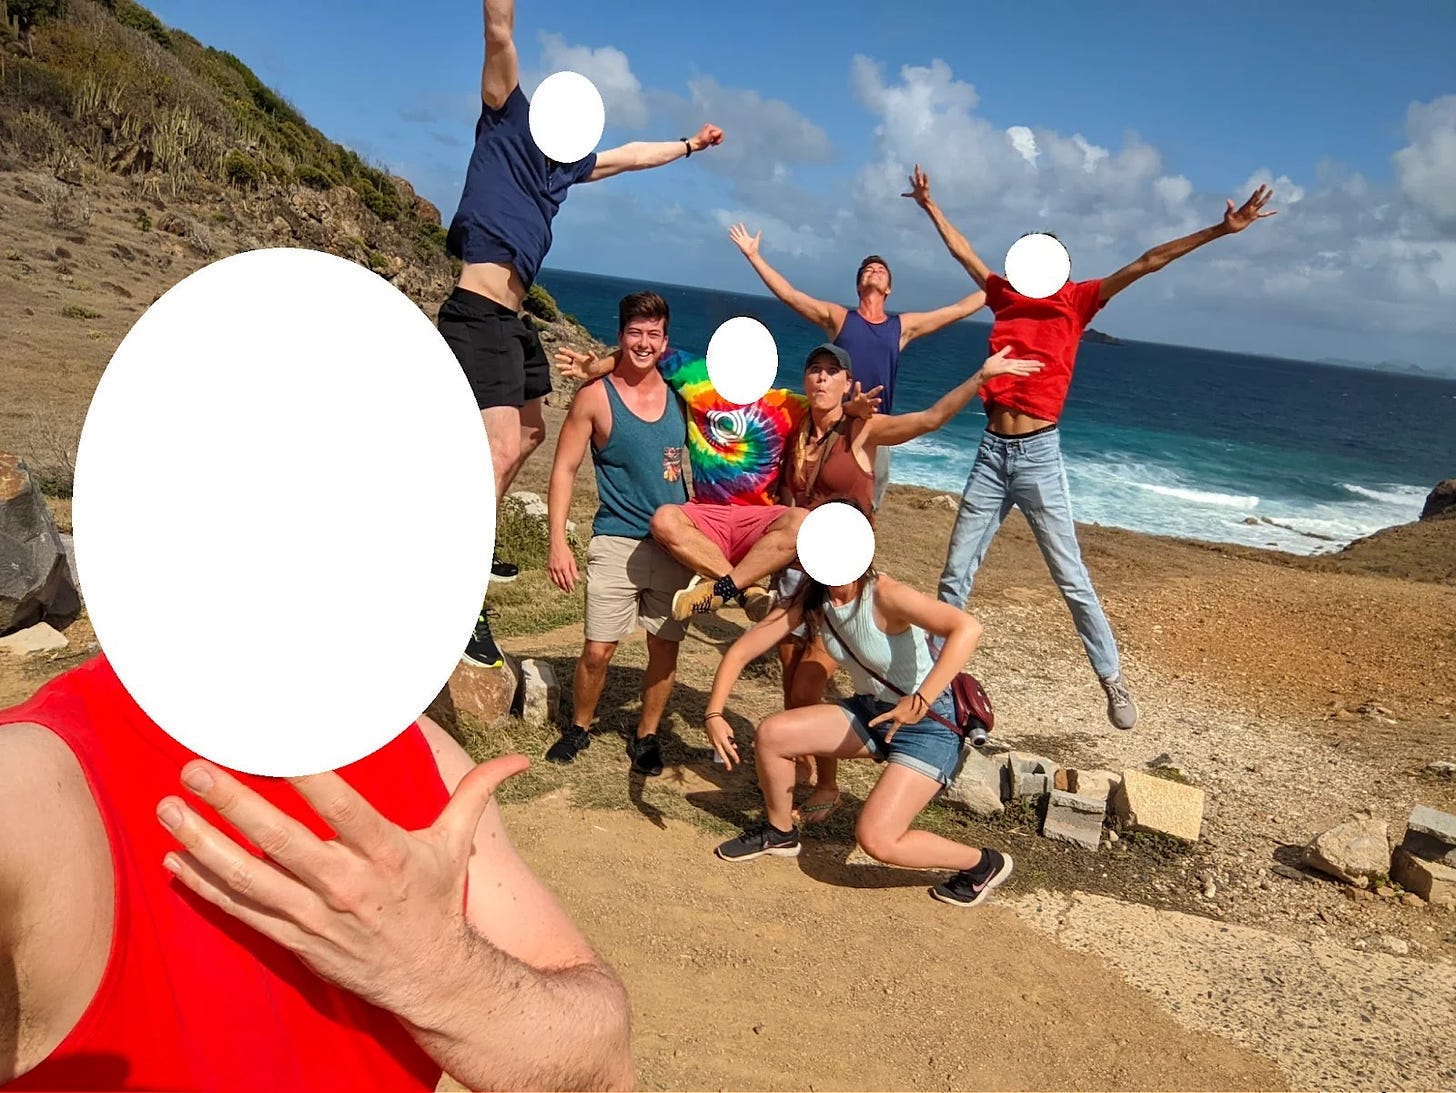 Group photo of cartoonishly exuberant people on a beach. Most faces have been whited out, but three are Nonlinear employees.